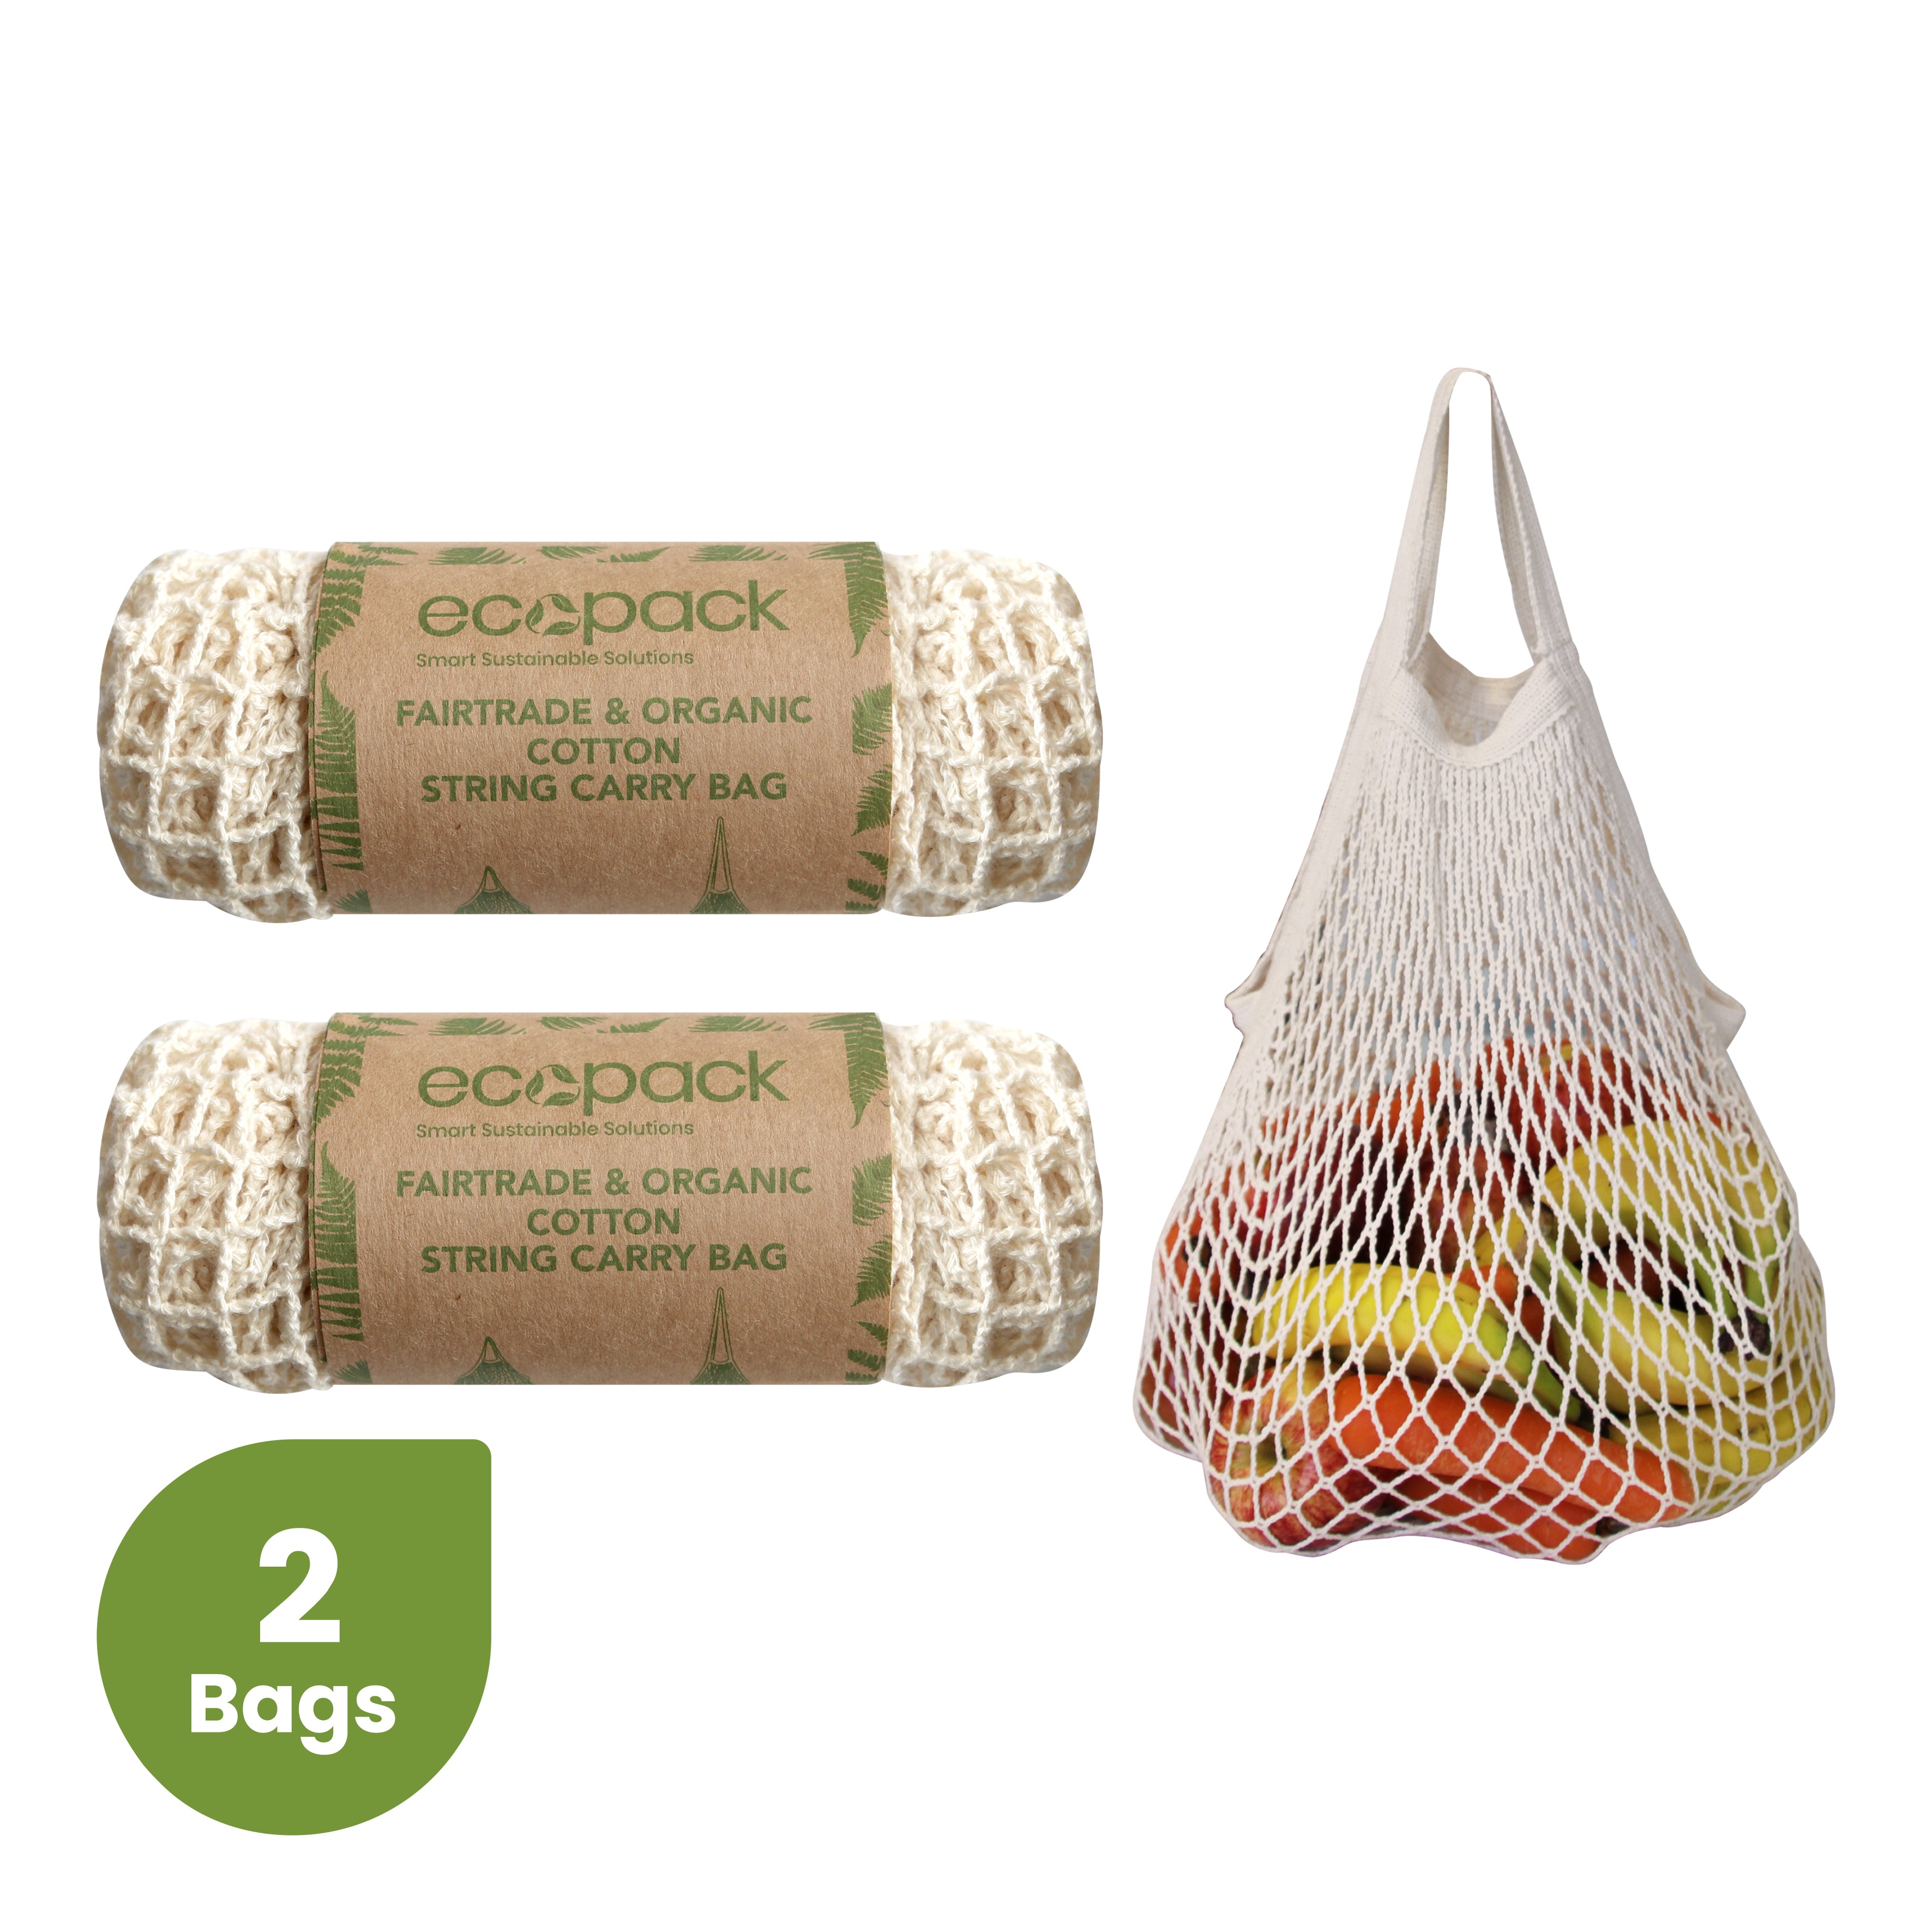 Ecopack Fairtrade & Organic Cotton String Bag with Short Handle x 2 bags